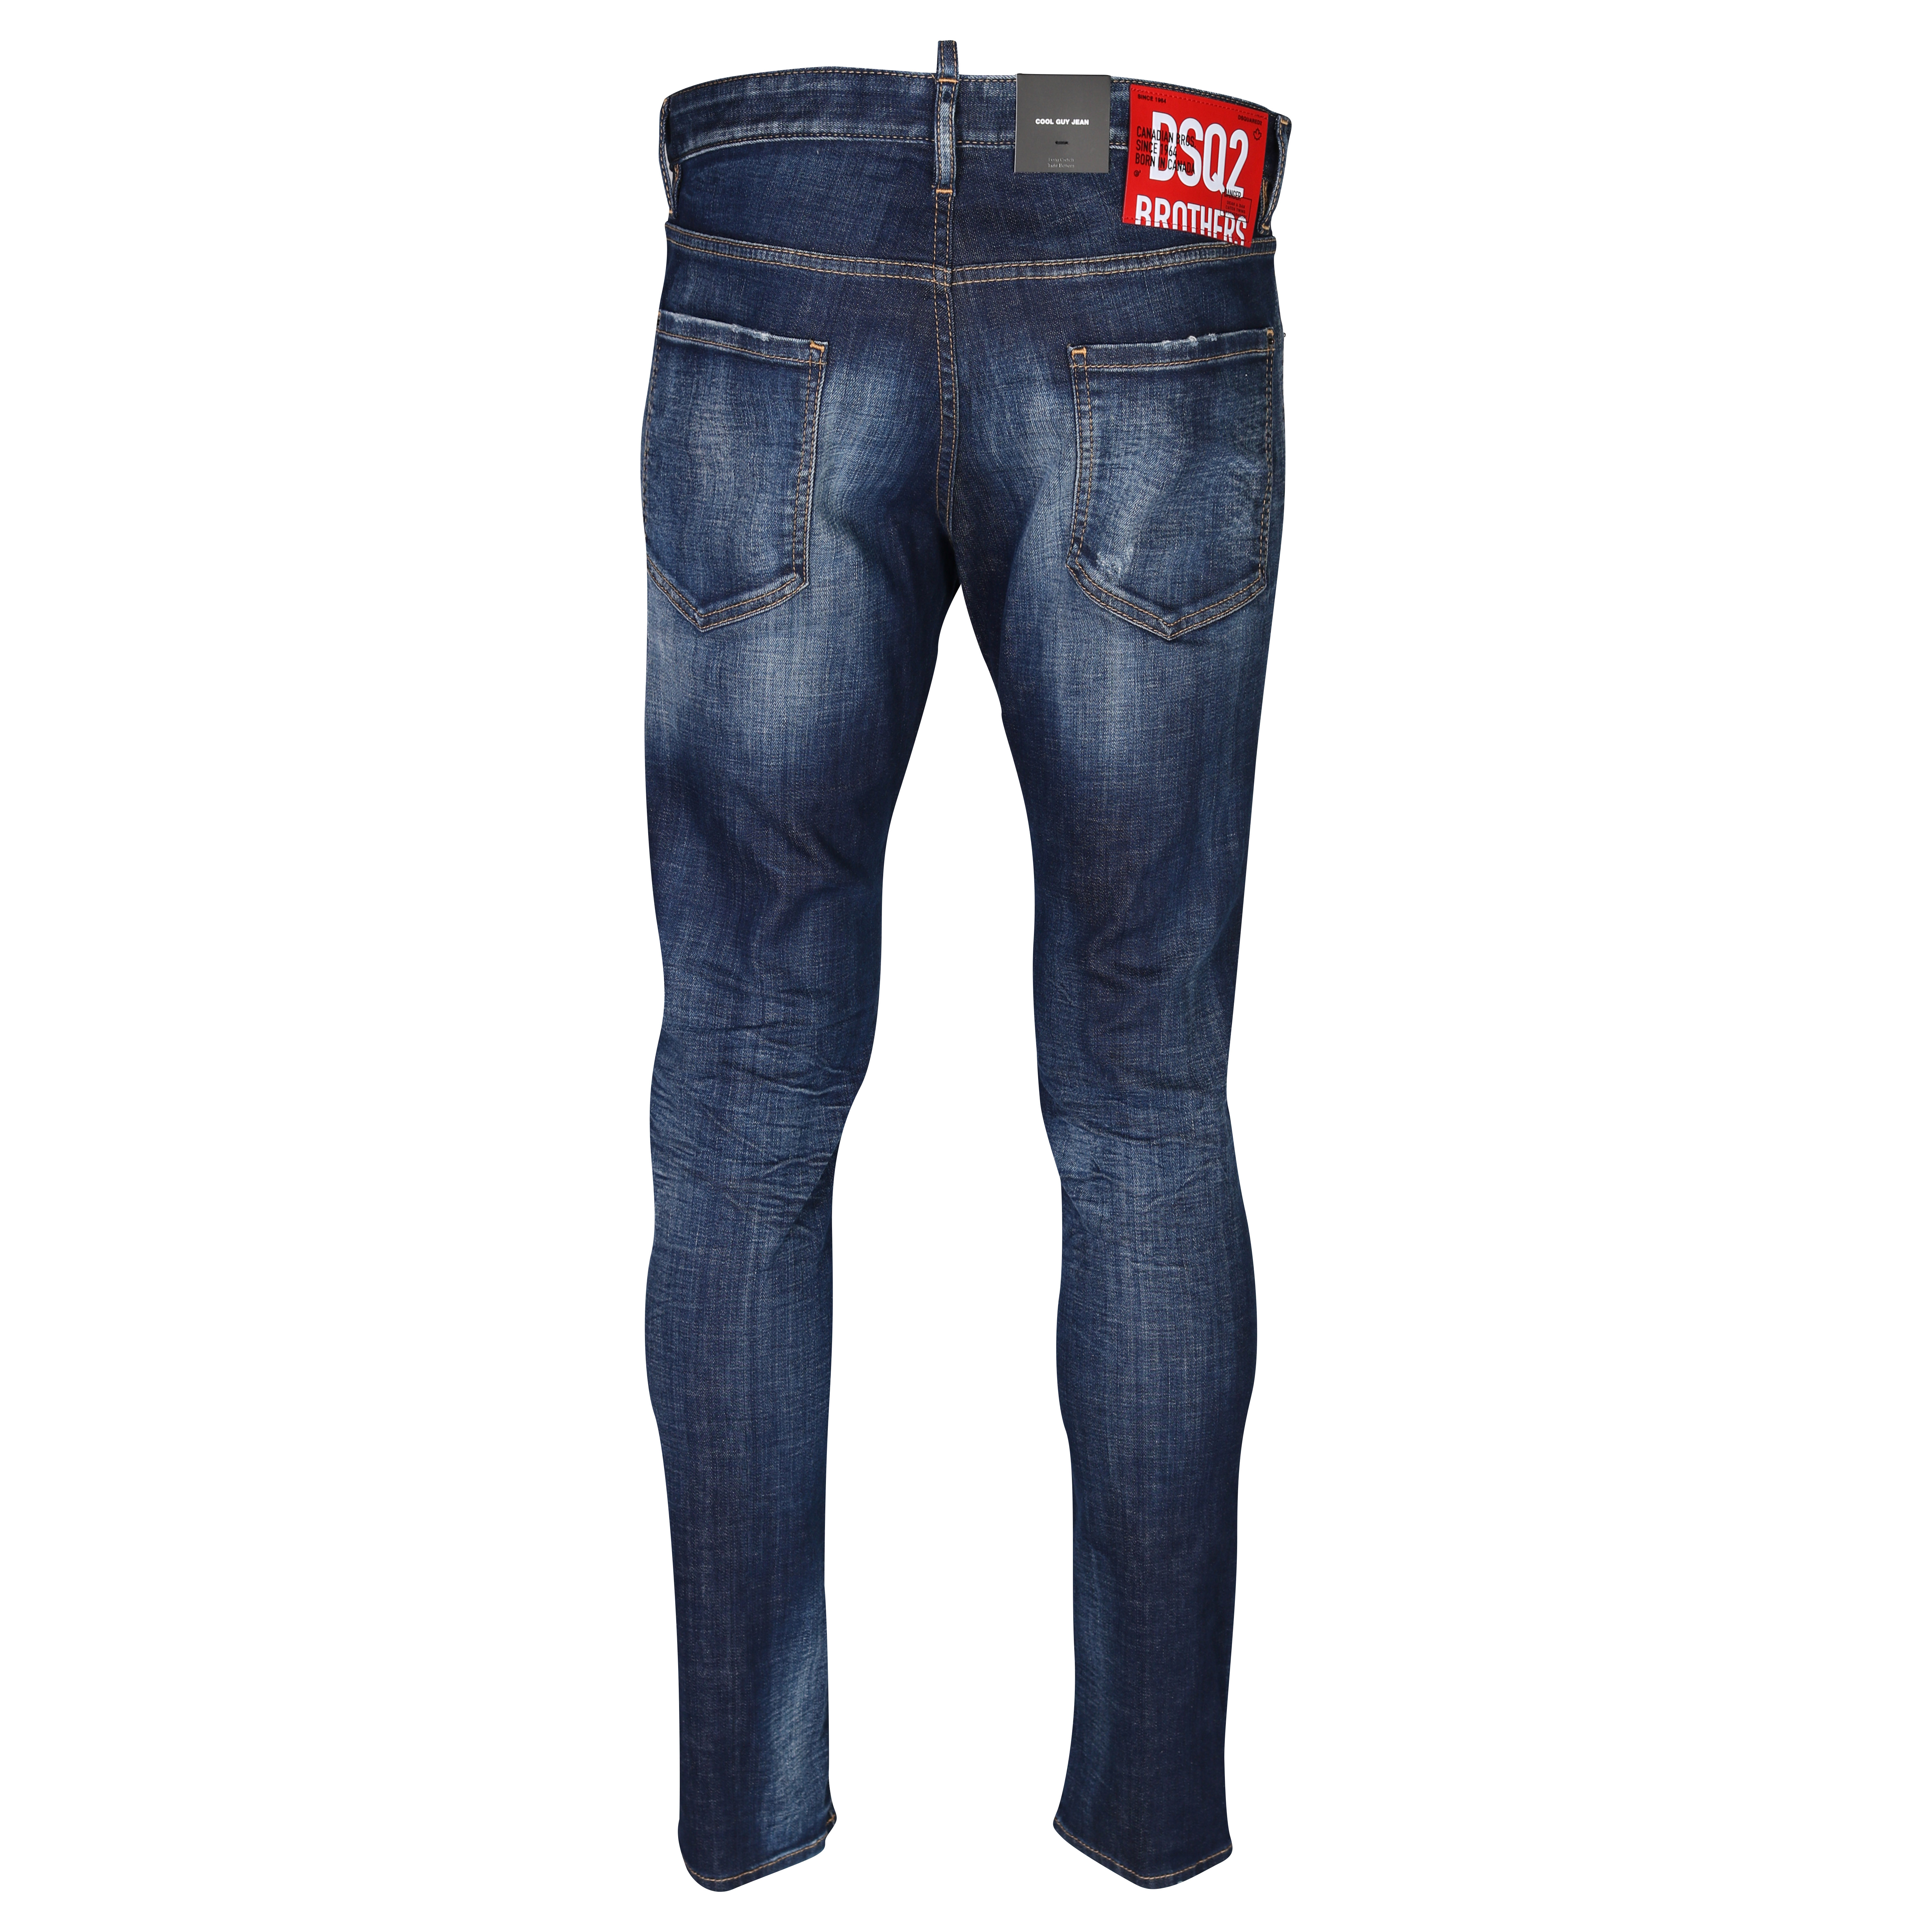 Dsquared Cool Guy Jean in Blue Wash 46